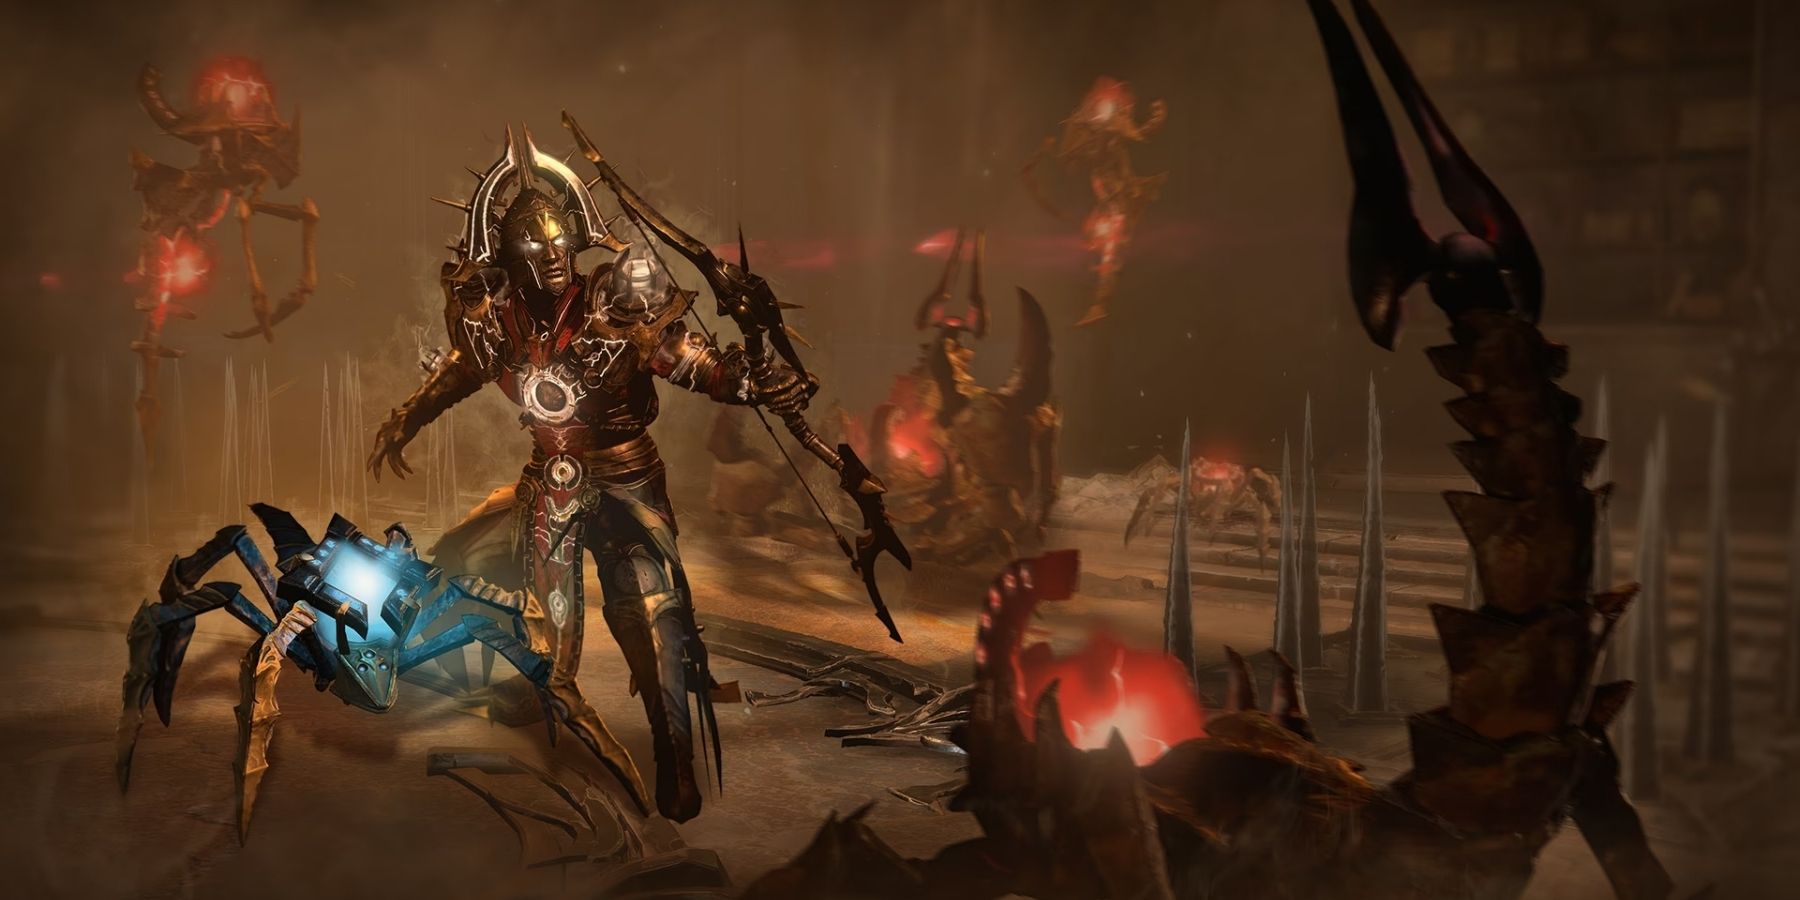 Diablo 4 Player Spots Flaw in Its Controversial Microtransaction Shop